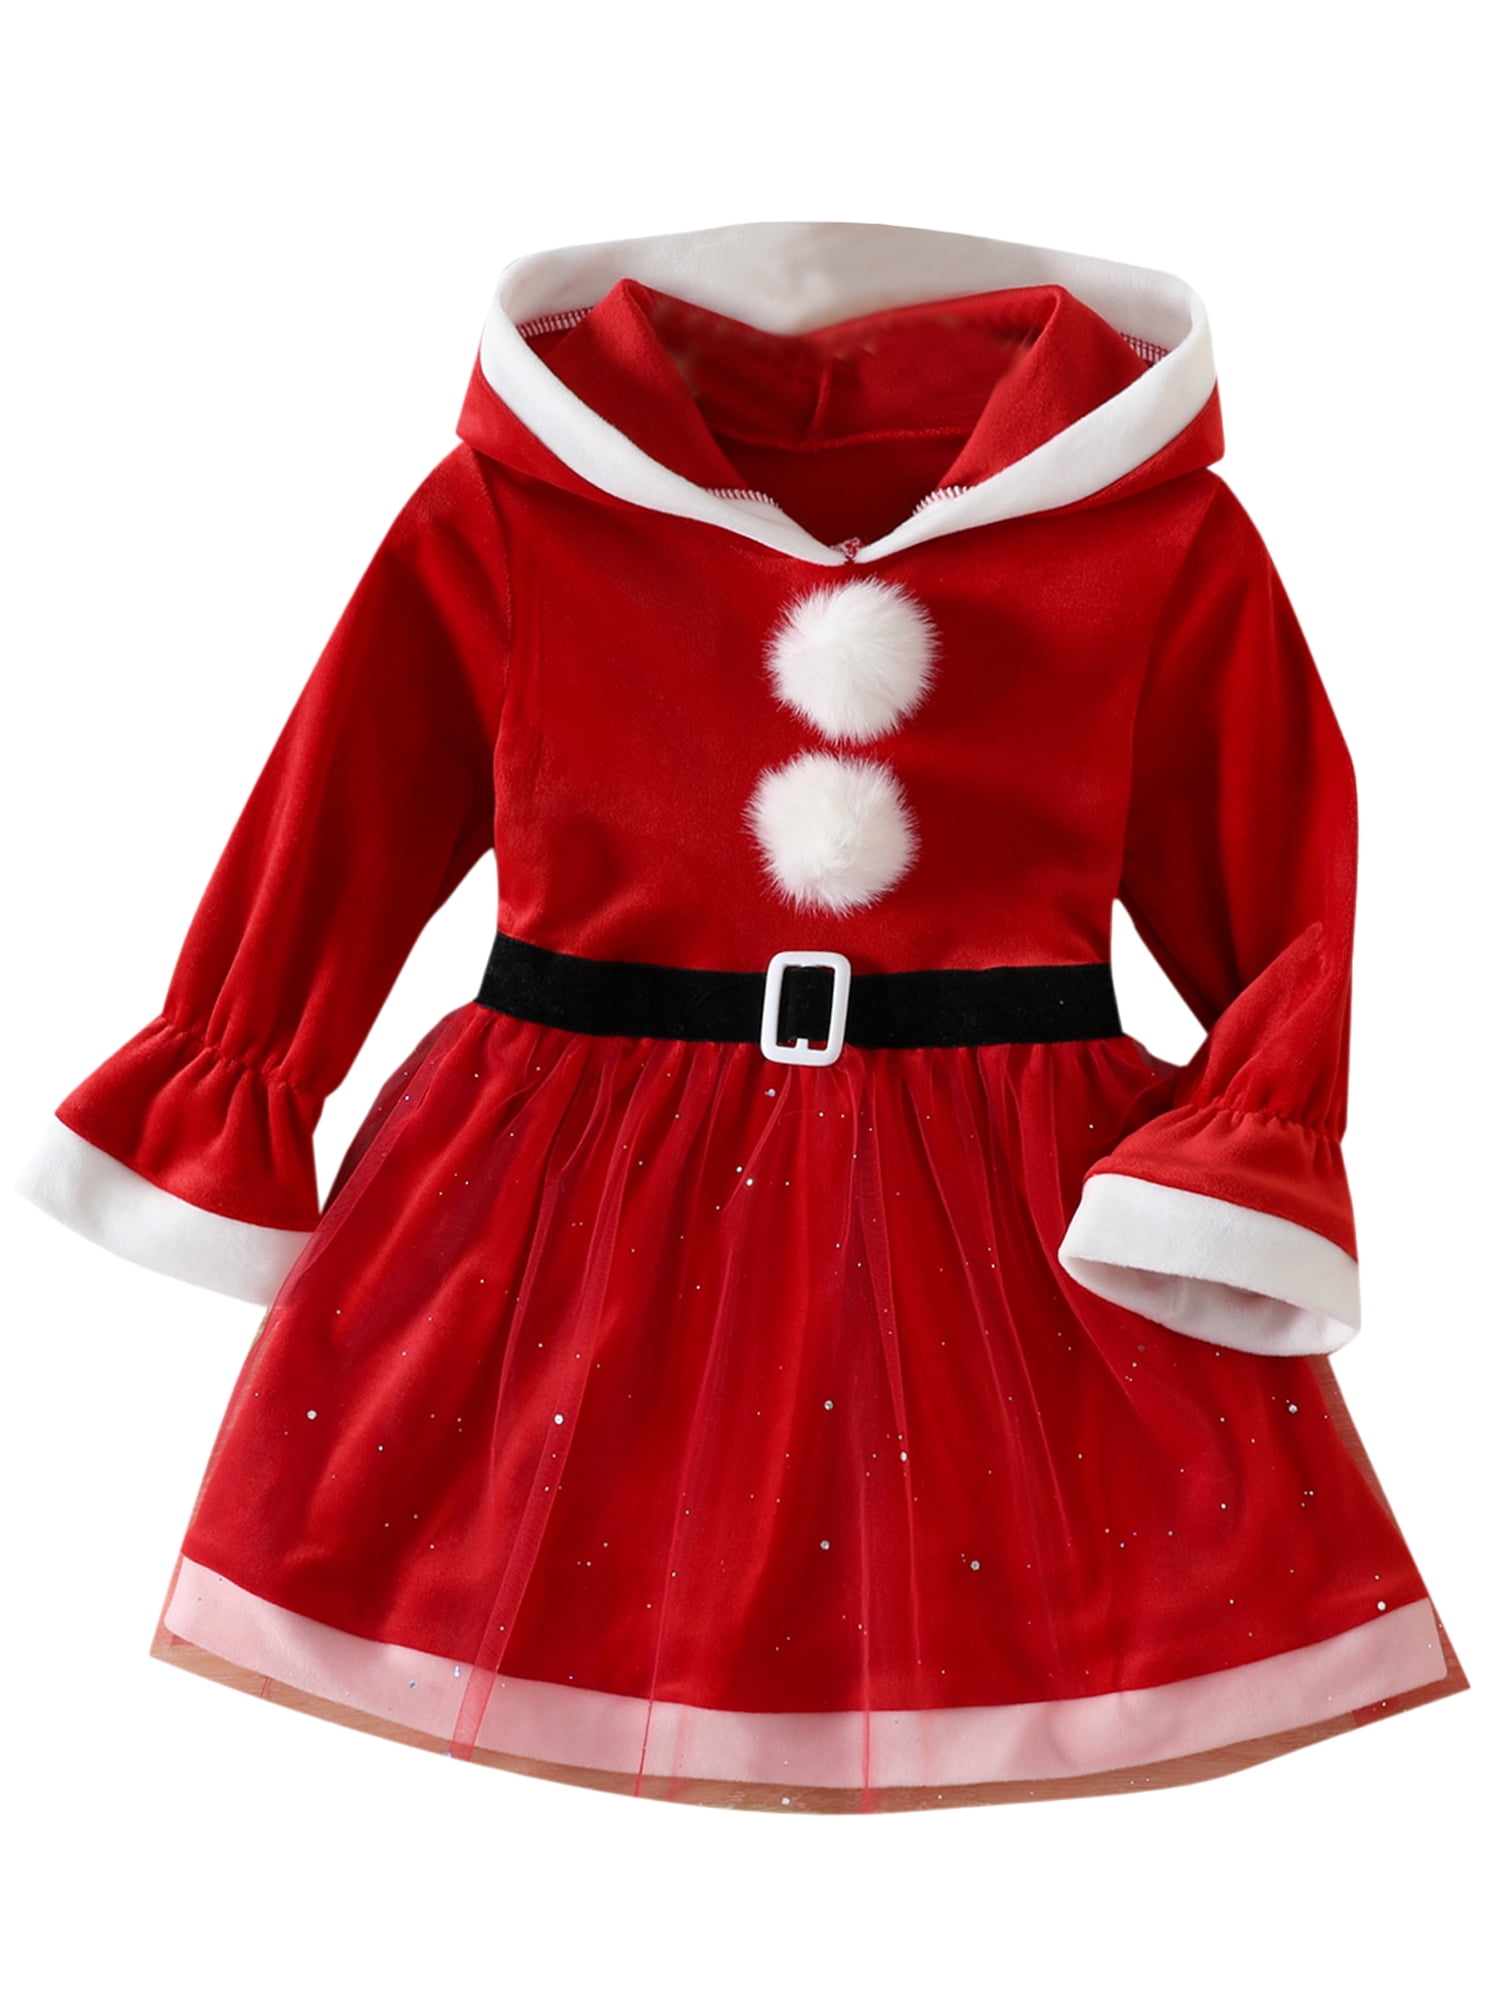 26 Luxury Christmas Dresses That Will Blow Your Mind